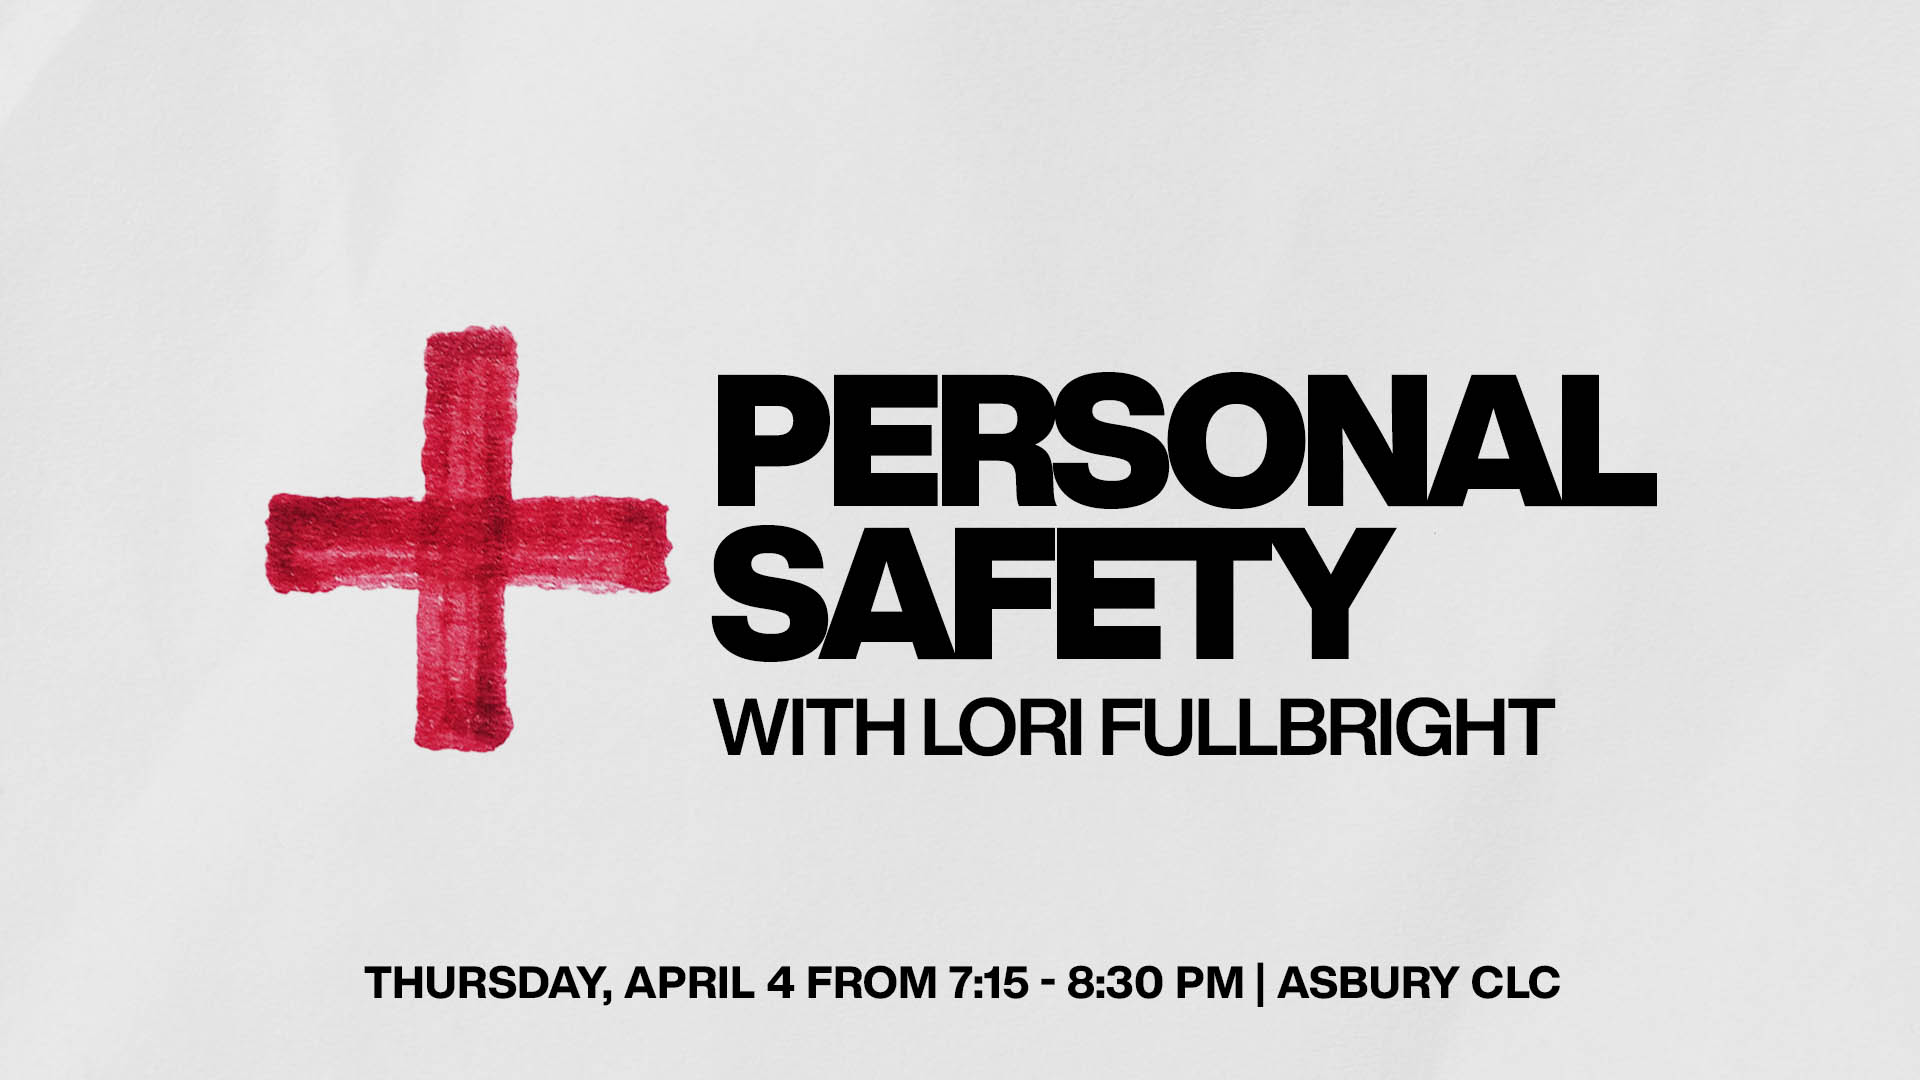 Personal Safety with Lori Fullbright